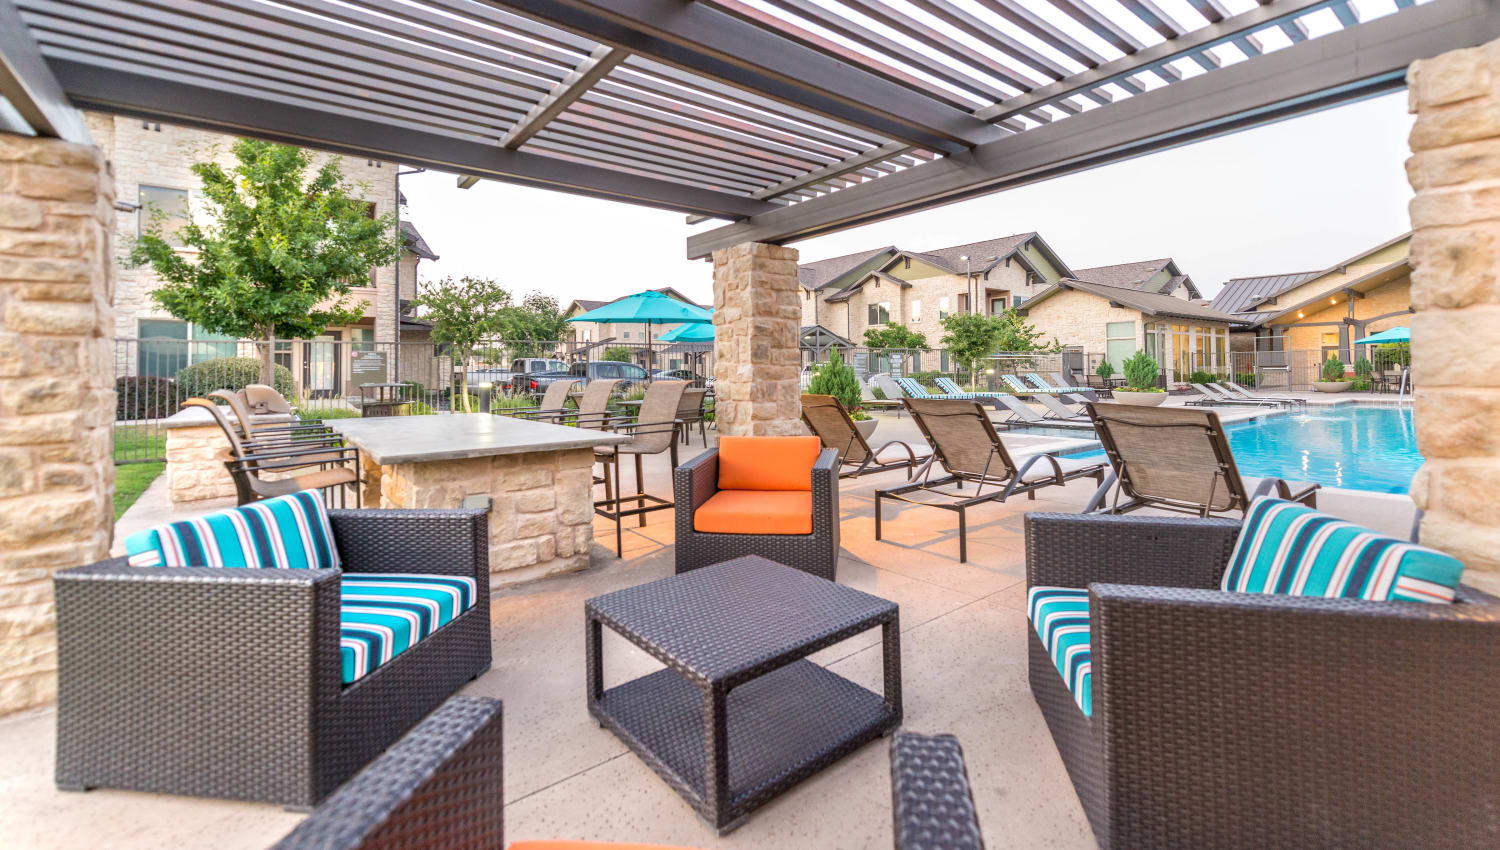 Pergola over an outdoor lounge area at Olympus Waterford in Keller, Texas